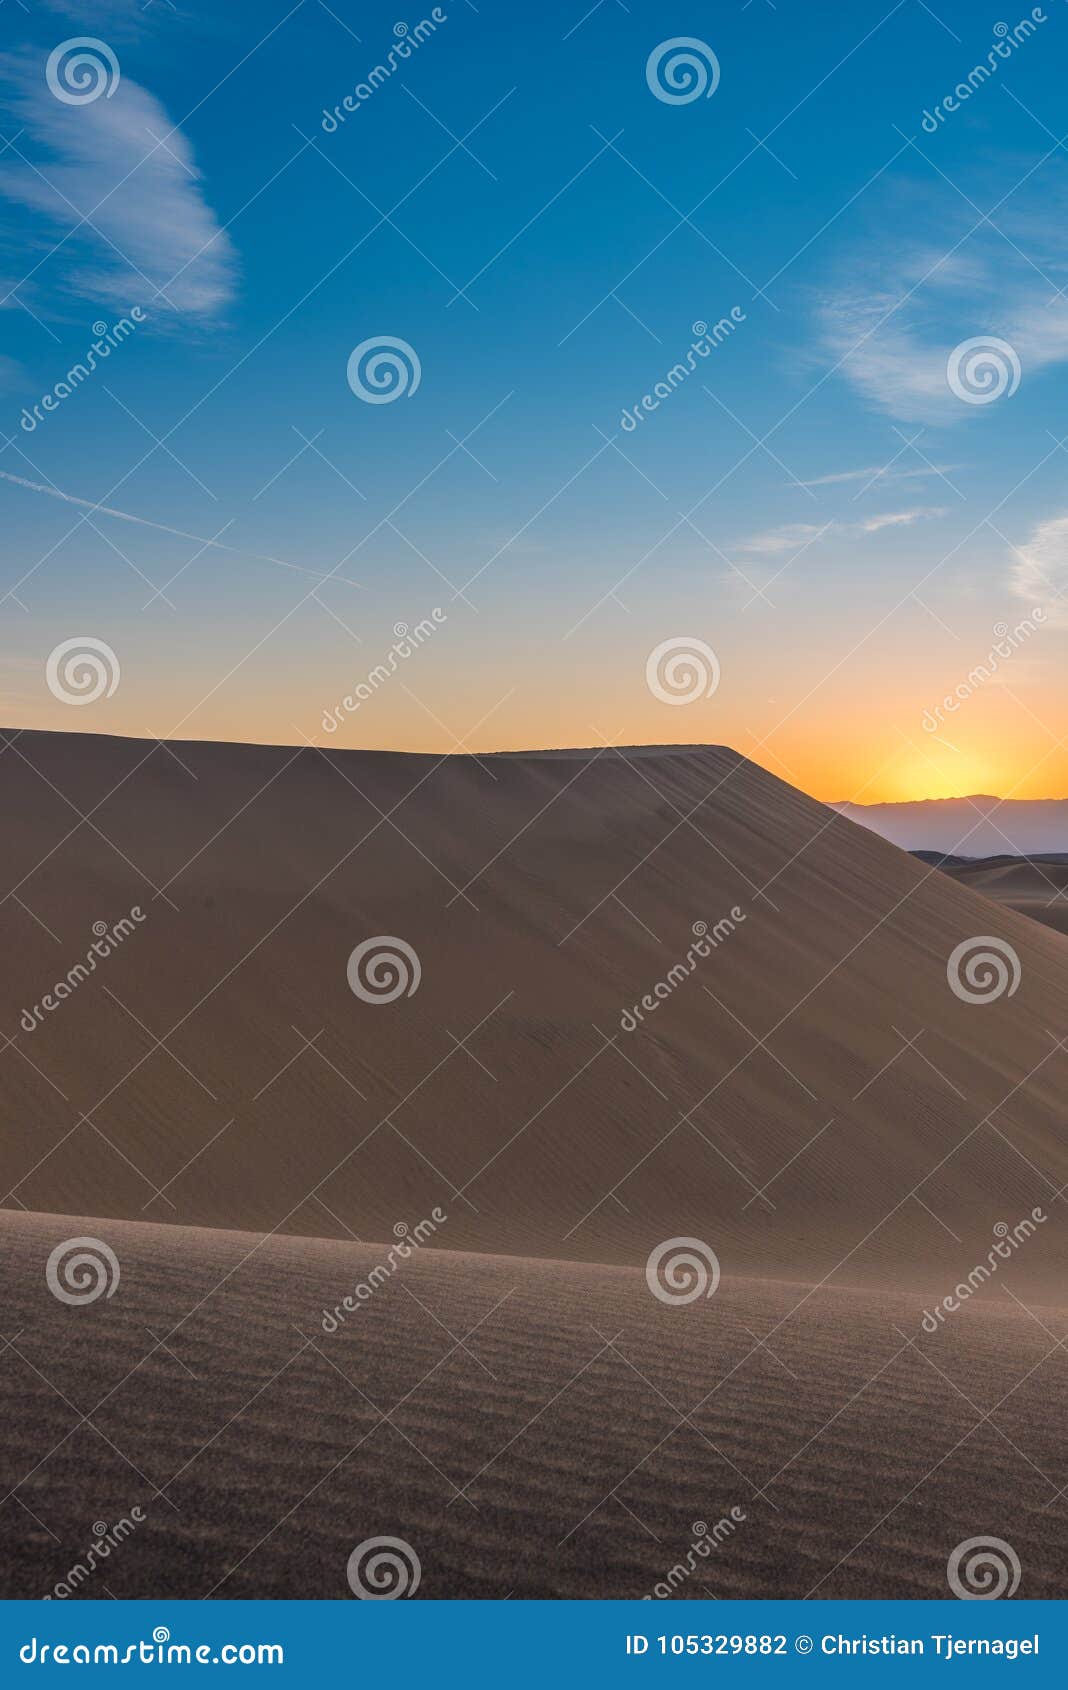 Mesquite Sand Dunes of Death Valley in California Stock Photo - Image ...